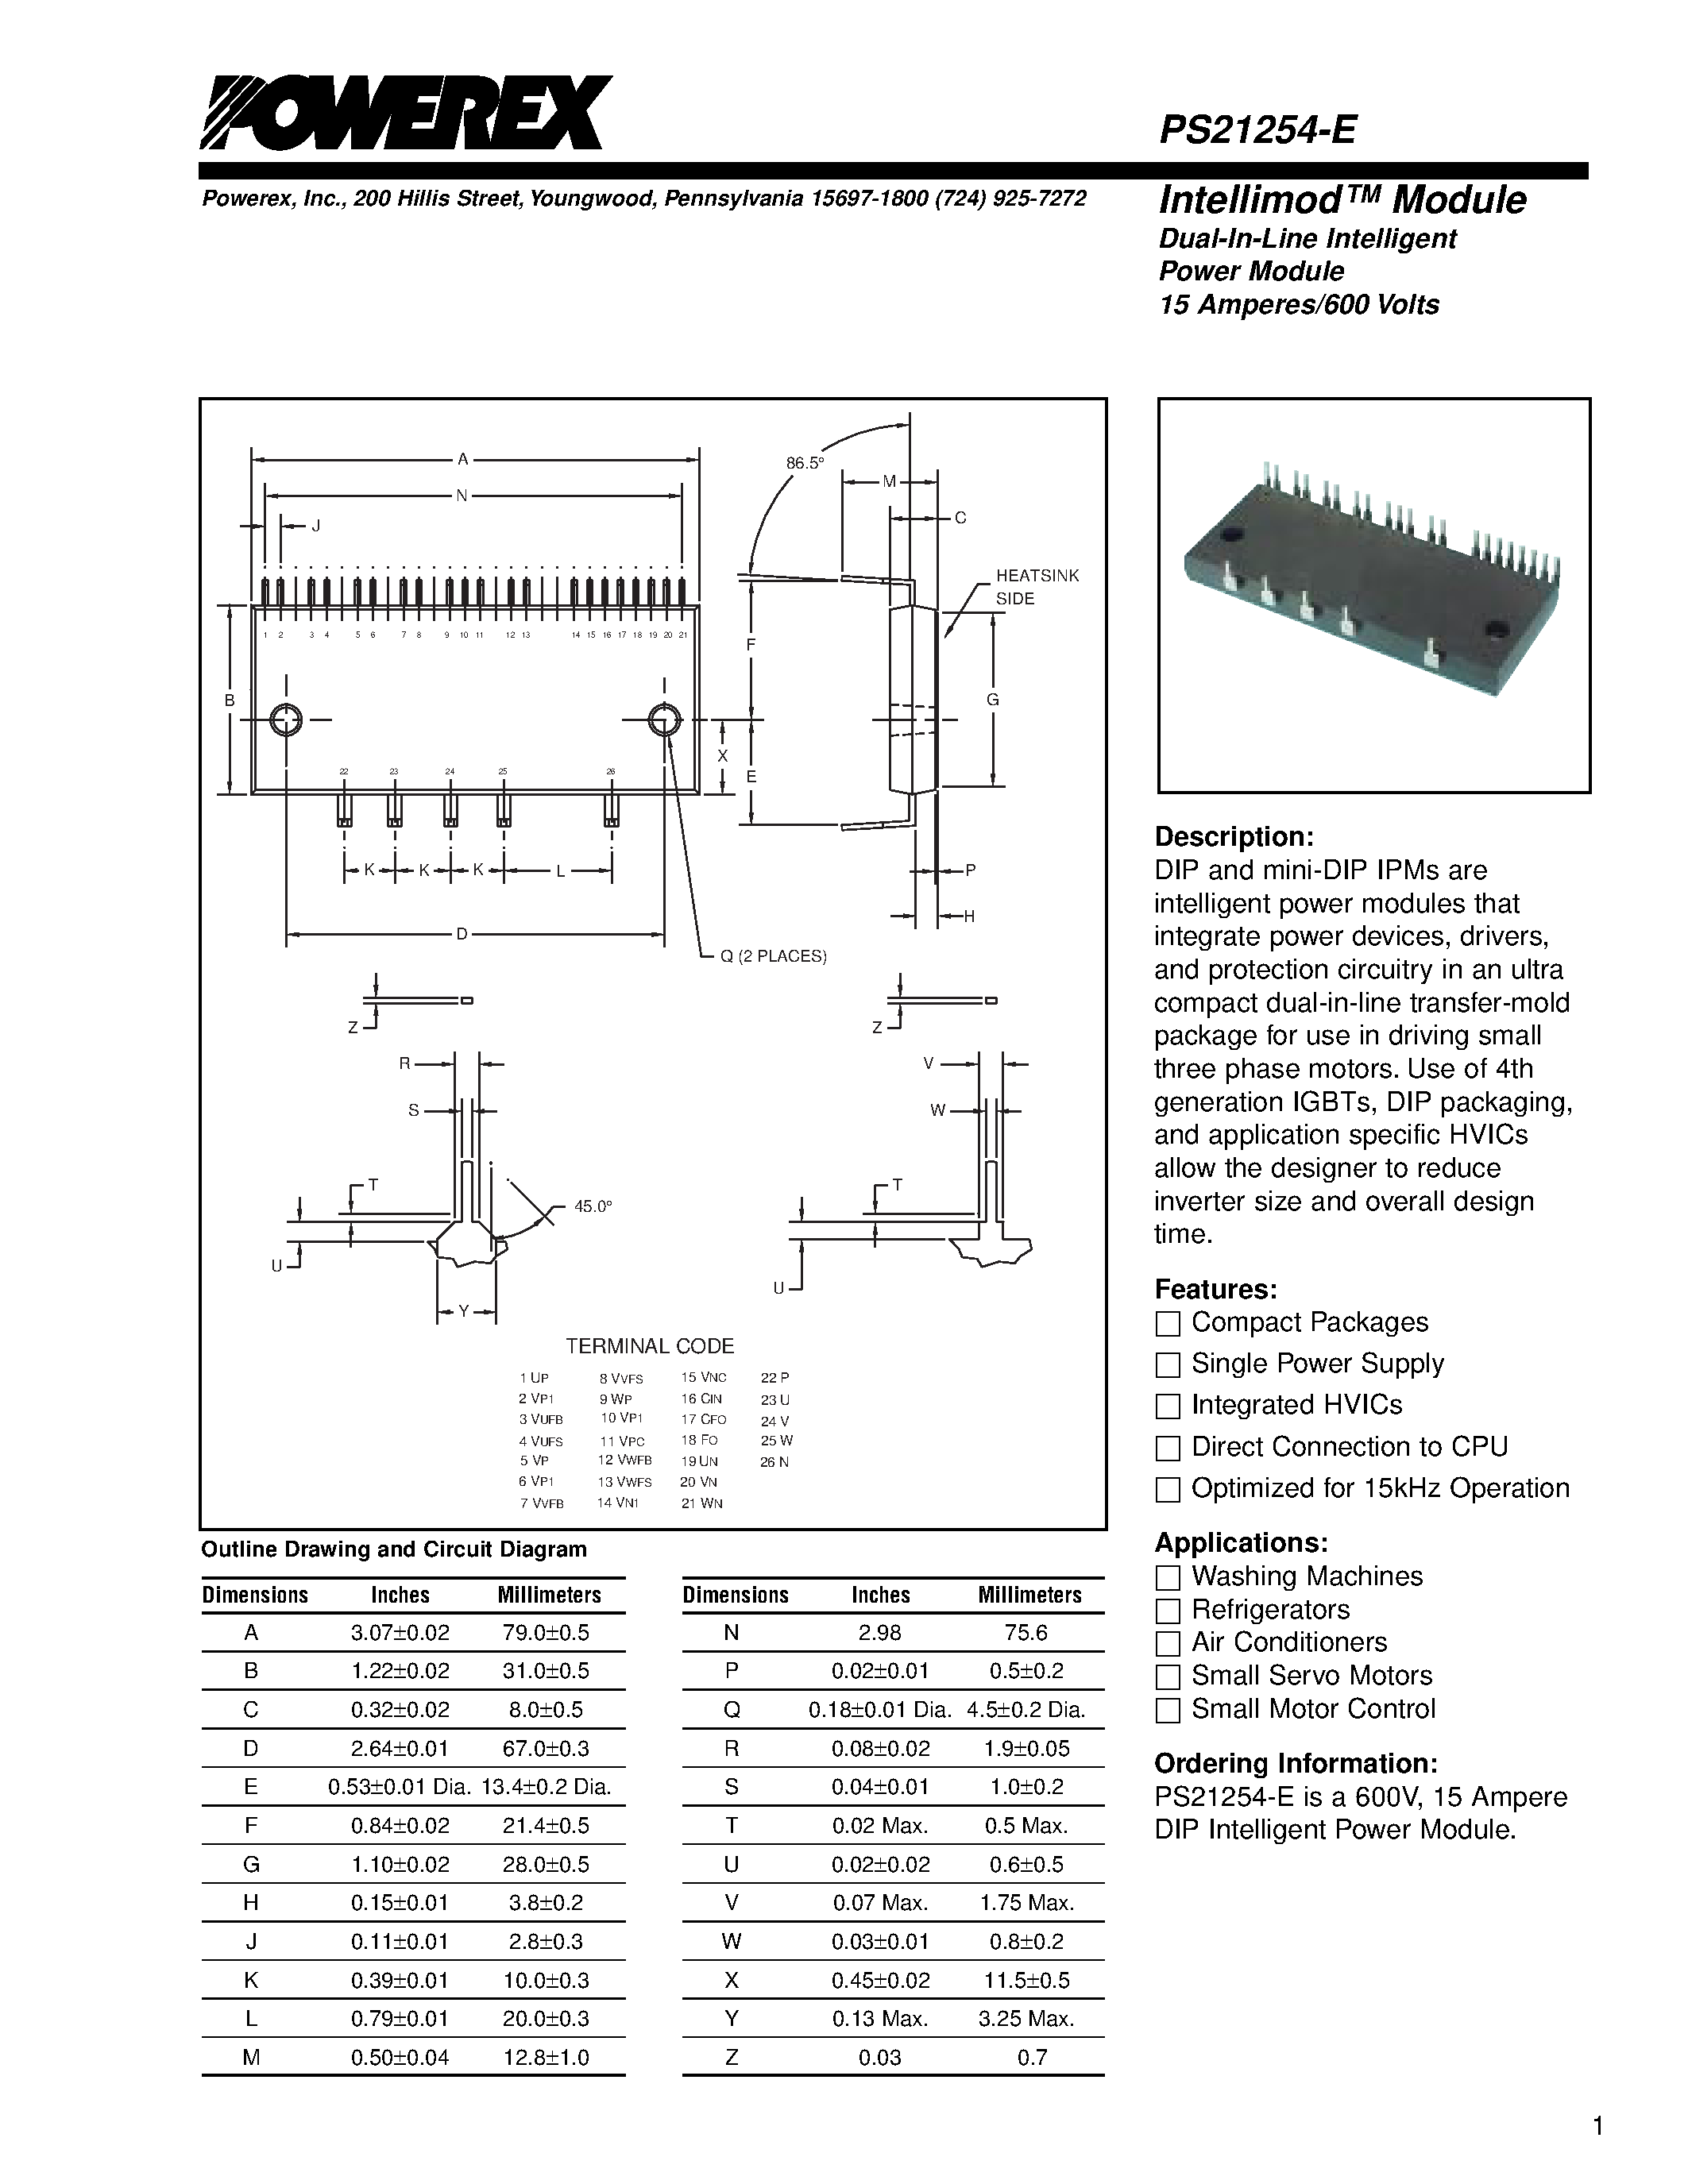 Datasheet PS21254-E - Intellimod Module Dual-In-Line Intelligent Power Module (15 Amperes/600 Volts) page 1